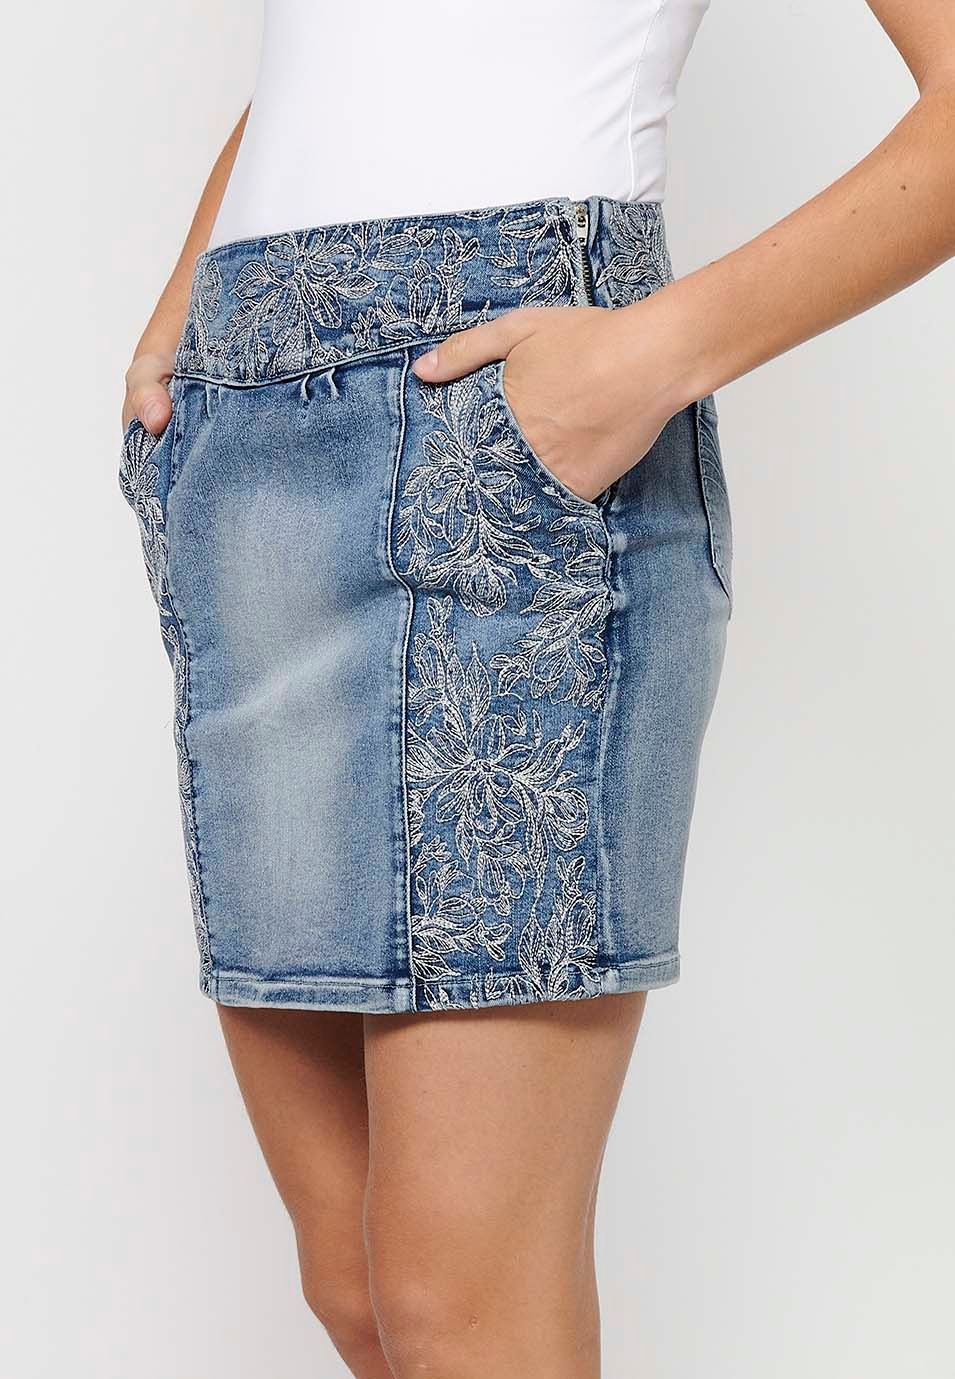 Short denim skirt with wide embroidered waist and floral embroidered details with side zipper closure in Blue for Women 2